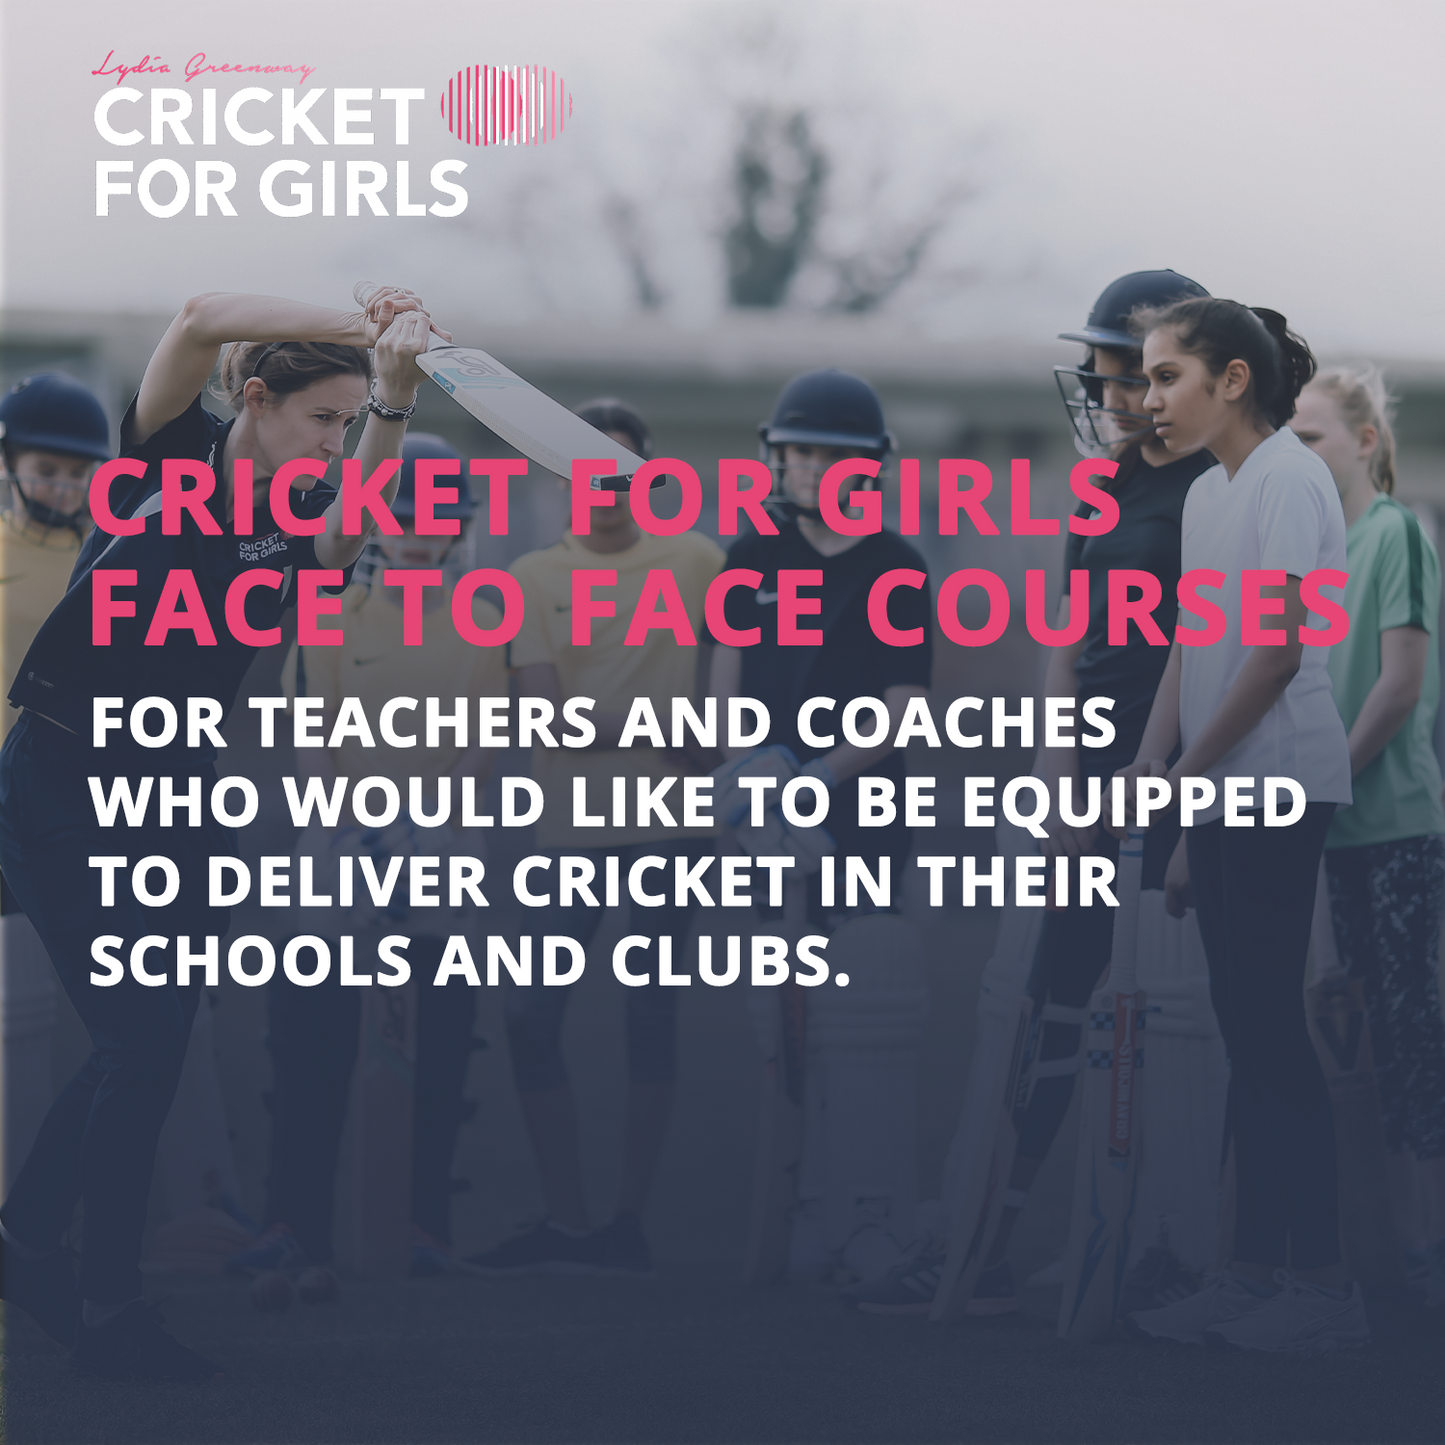 Cricket for Girls Conference 2024 - Friday 19th April 2024 - Venue TBC (London area)